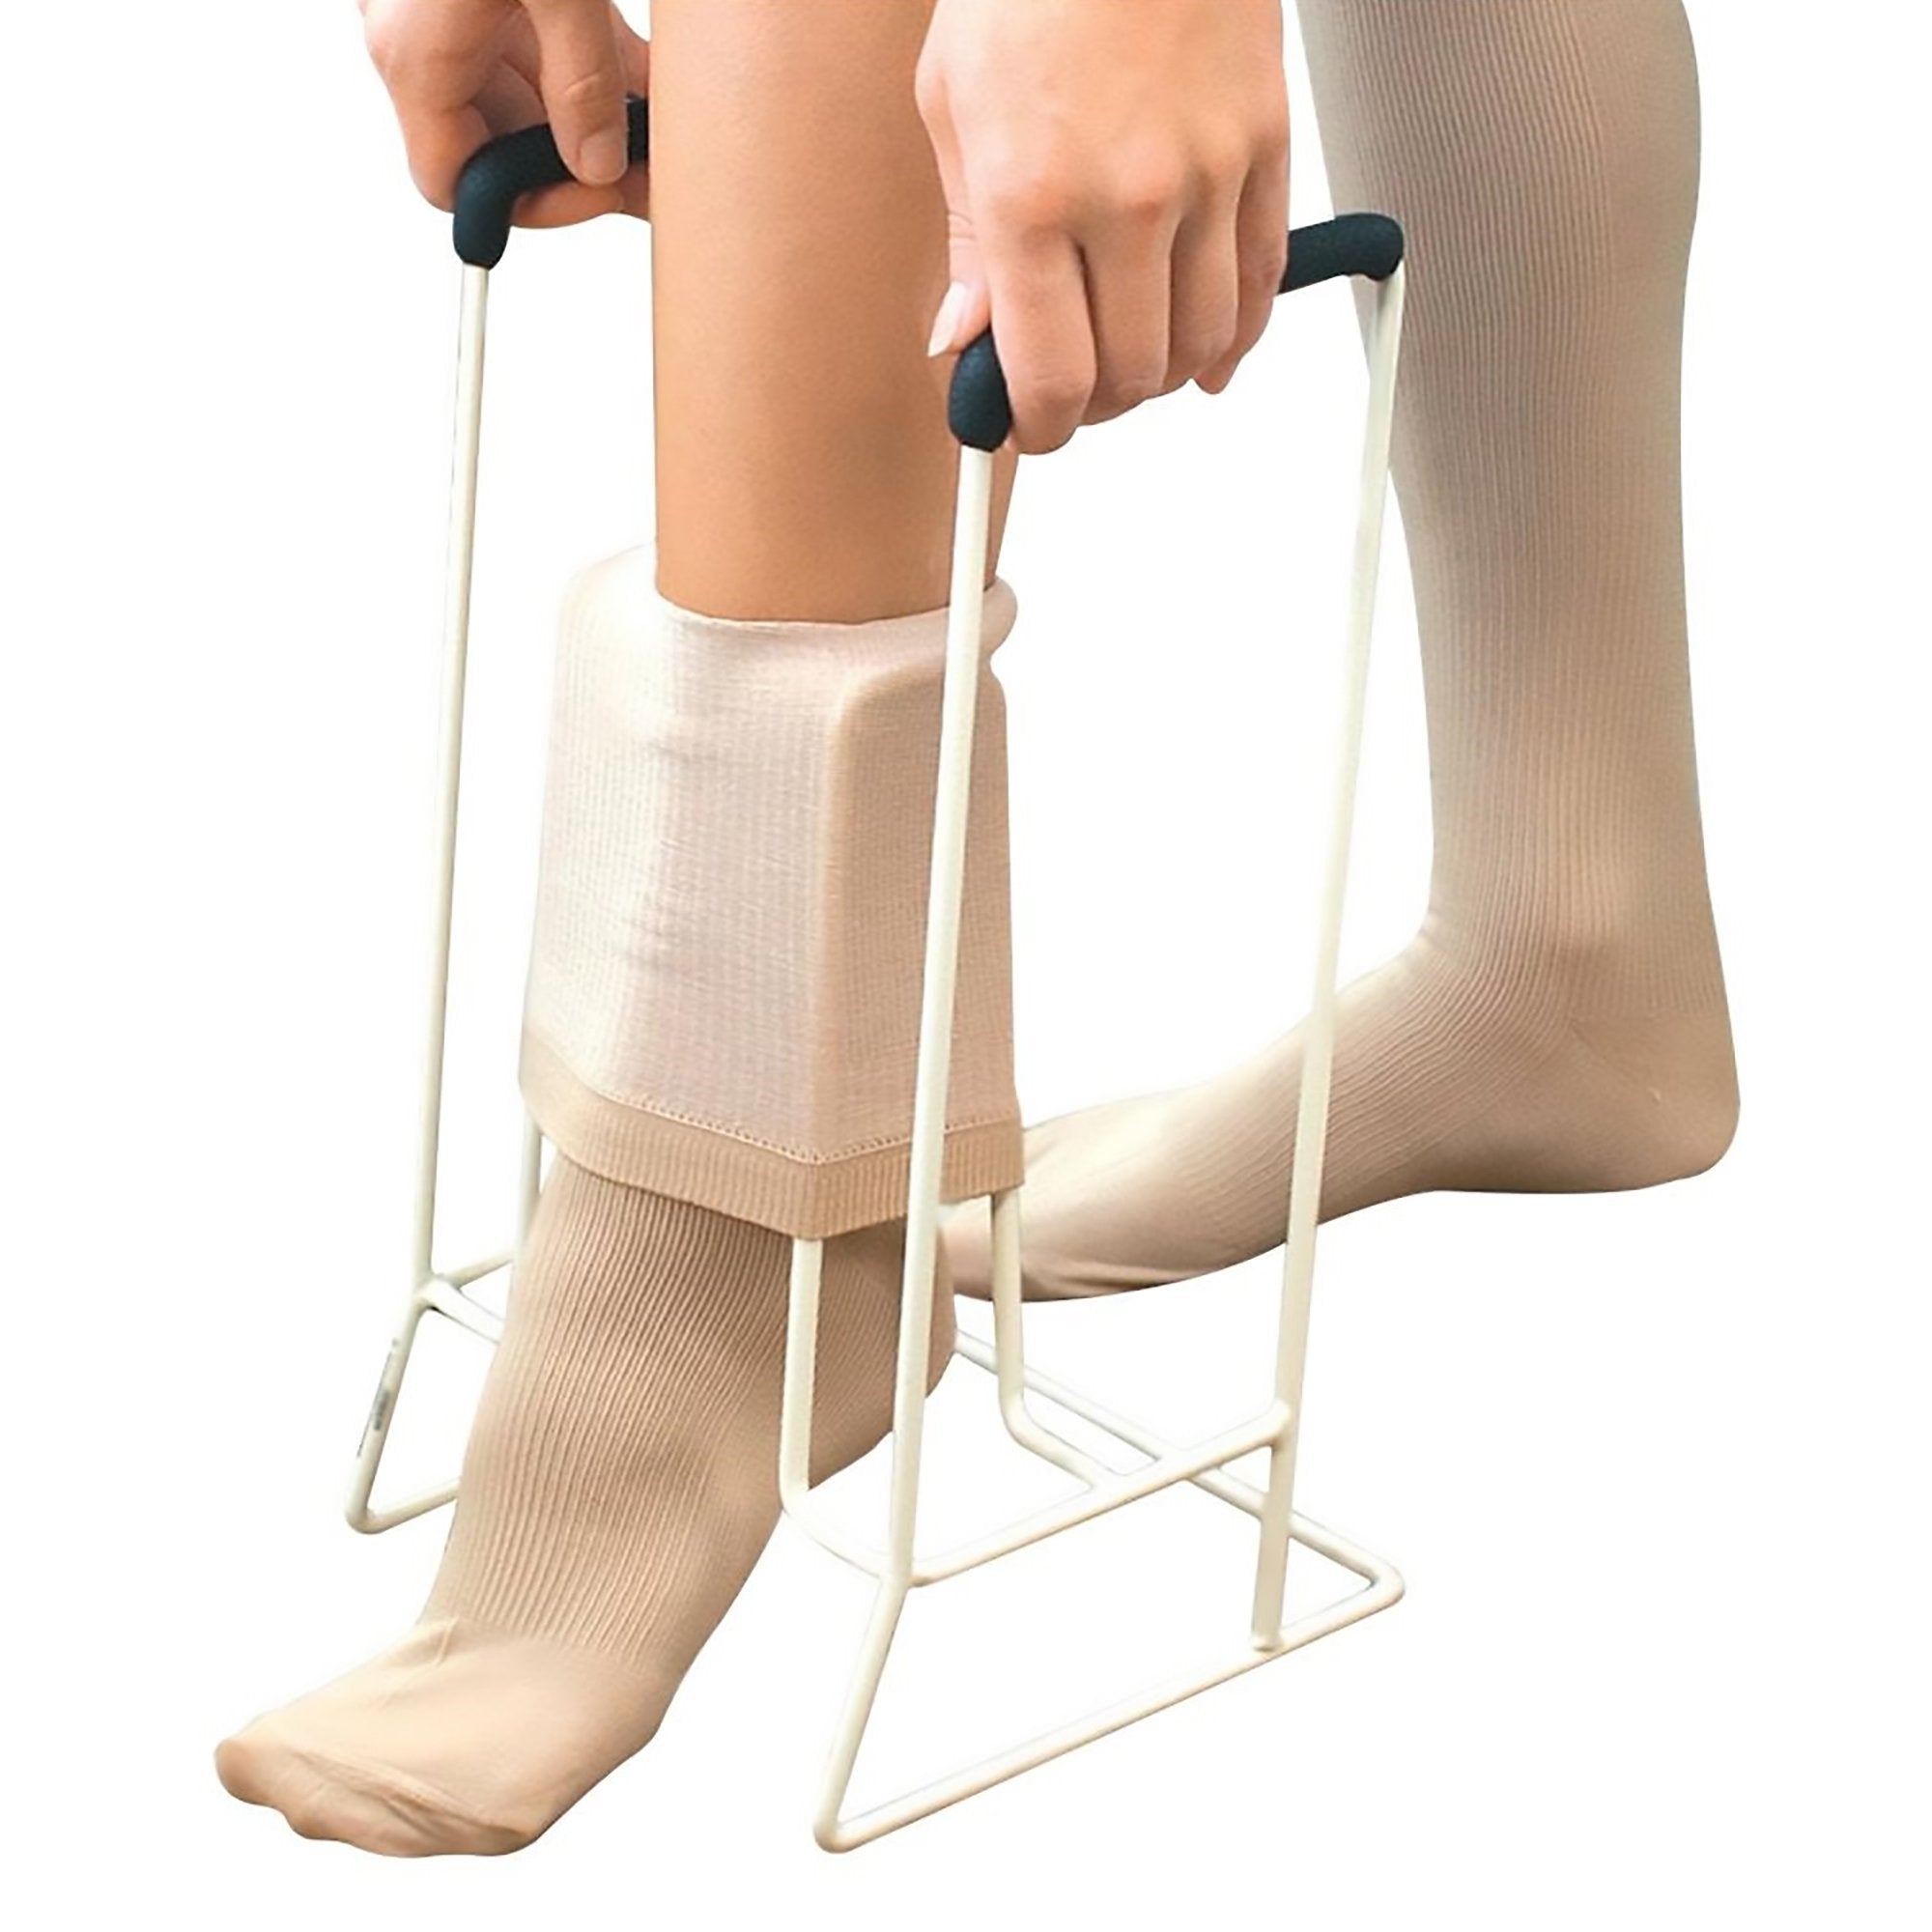 Compression Stocking Aid JOBST Up to 18 Inch Calf Circumference